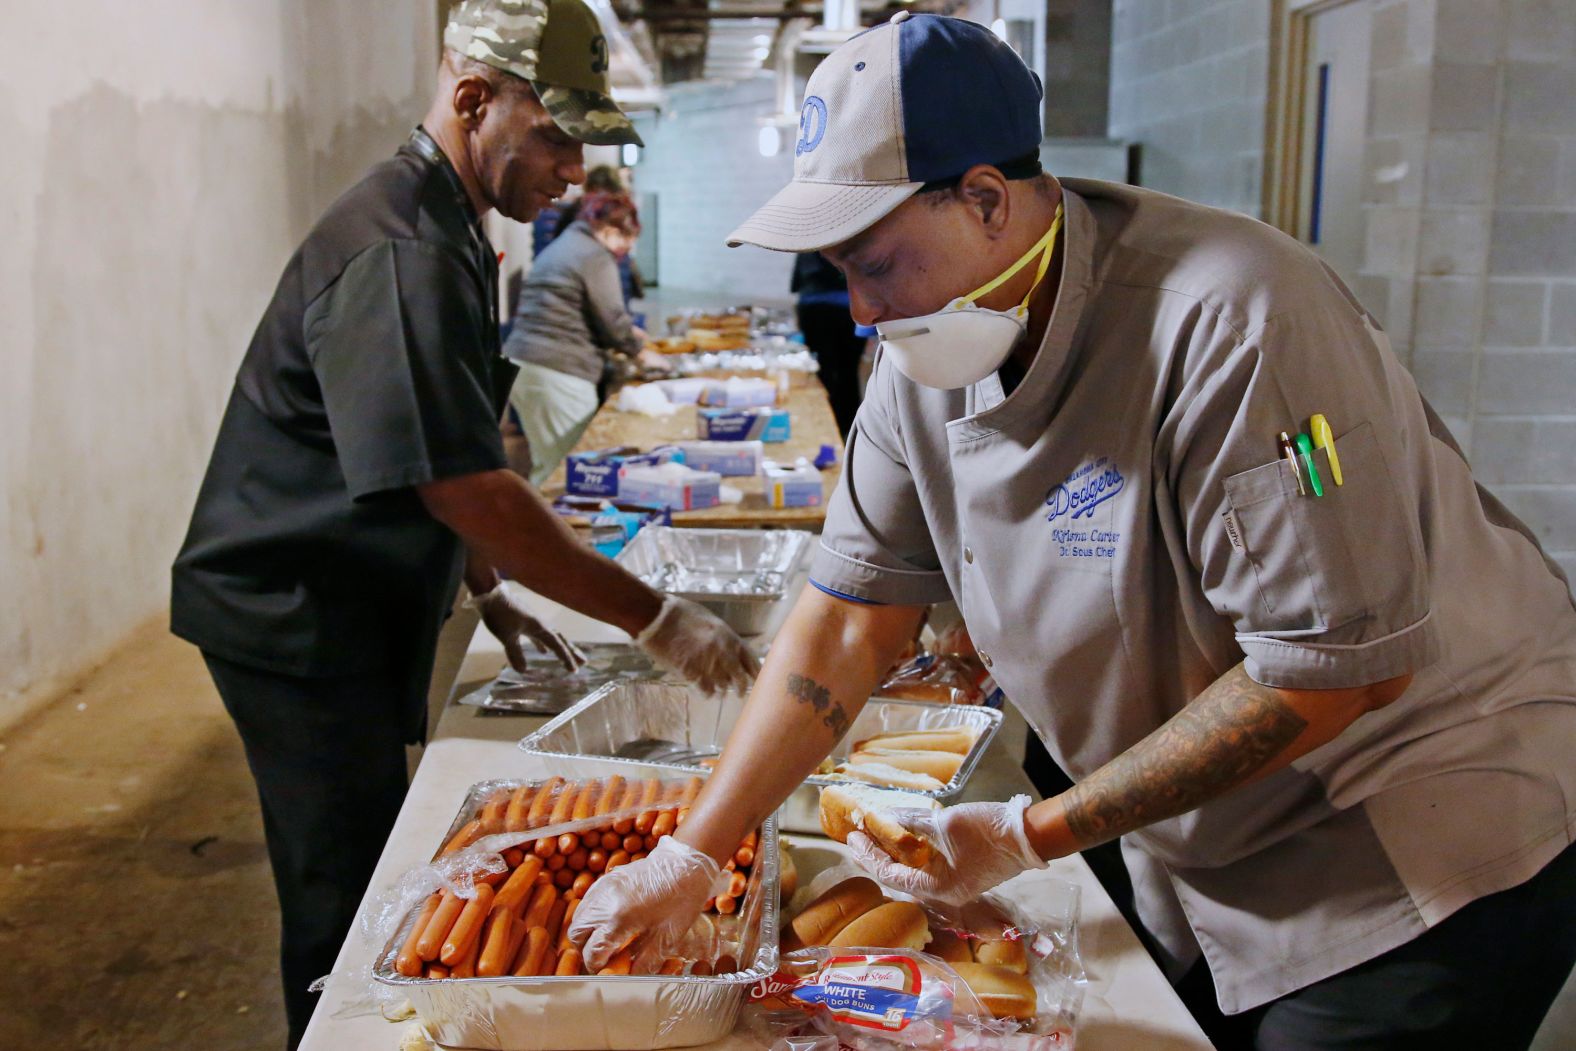 Krisna Carter, a junior sous-chef for the Oklahoma City Dodgers, prepares hot dogs for front-line workers on what would have been the minor-league baseball team's opening day on April 9.